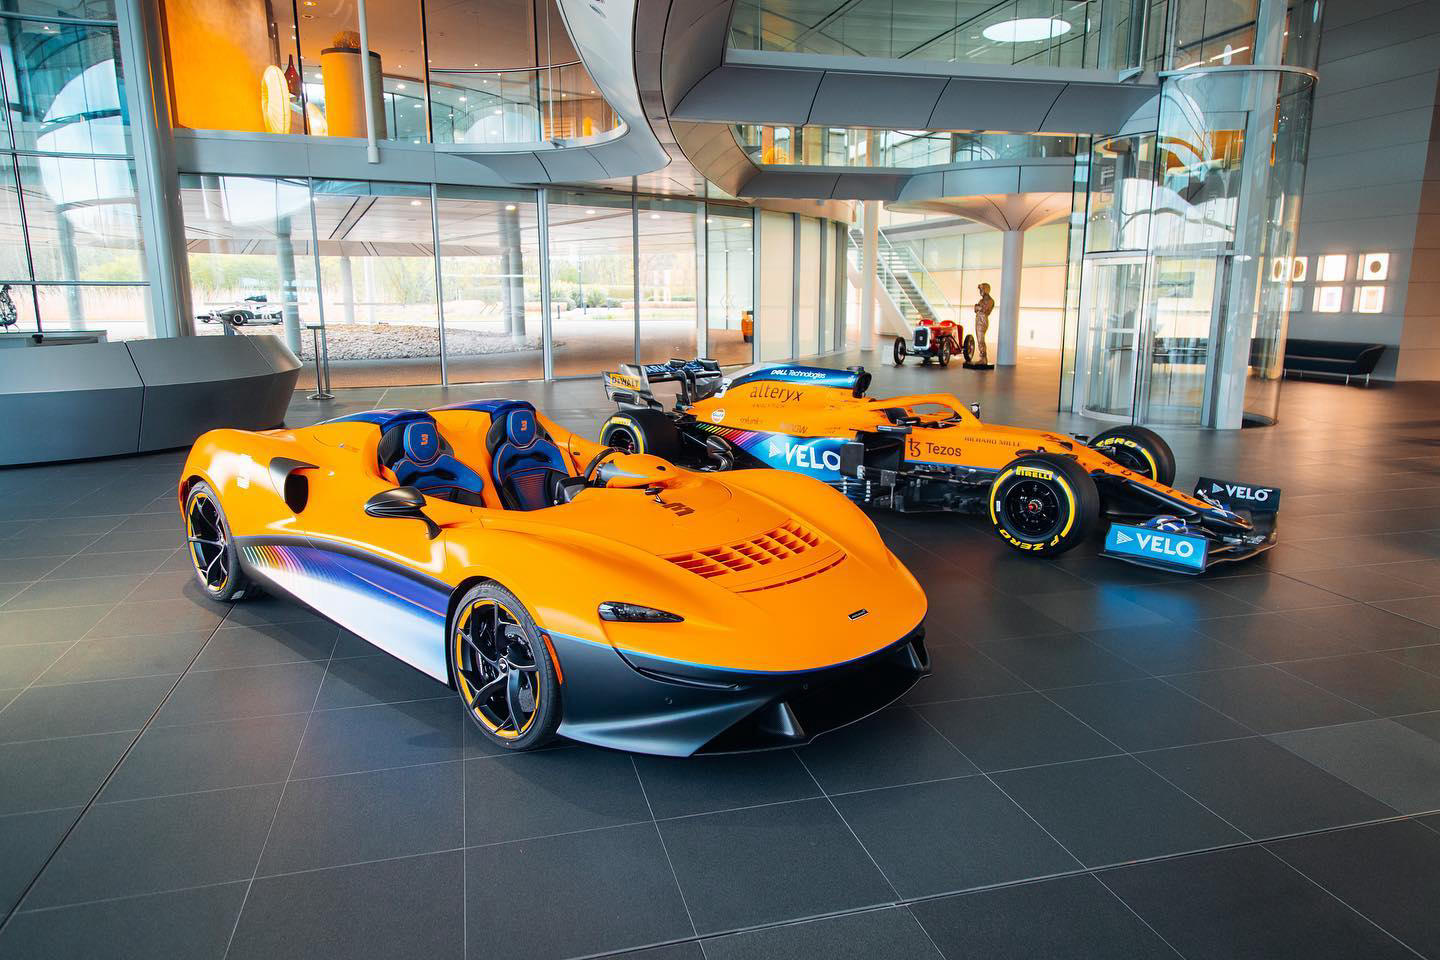 image  1 McLaren Automotive - Taking F1 engineering to the road